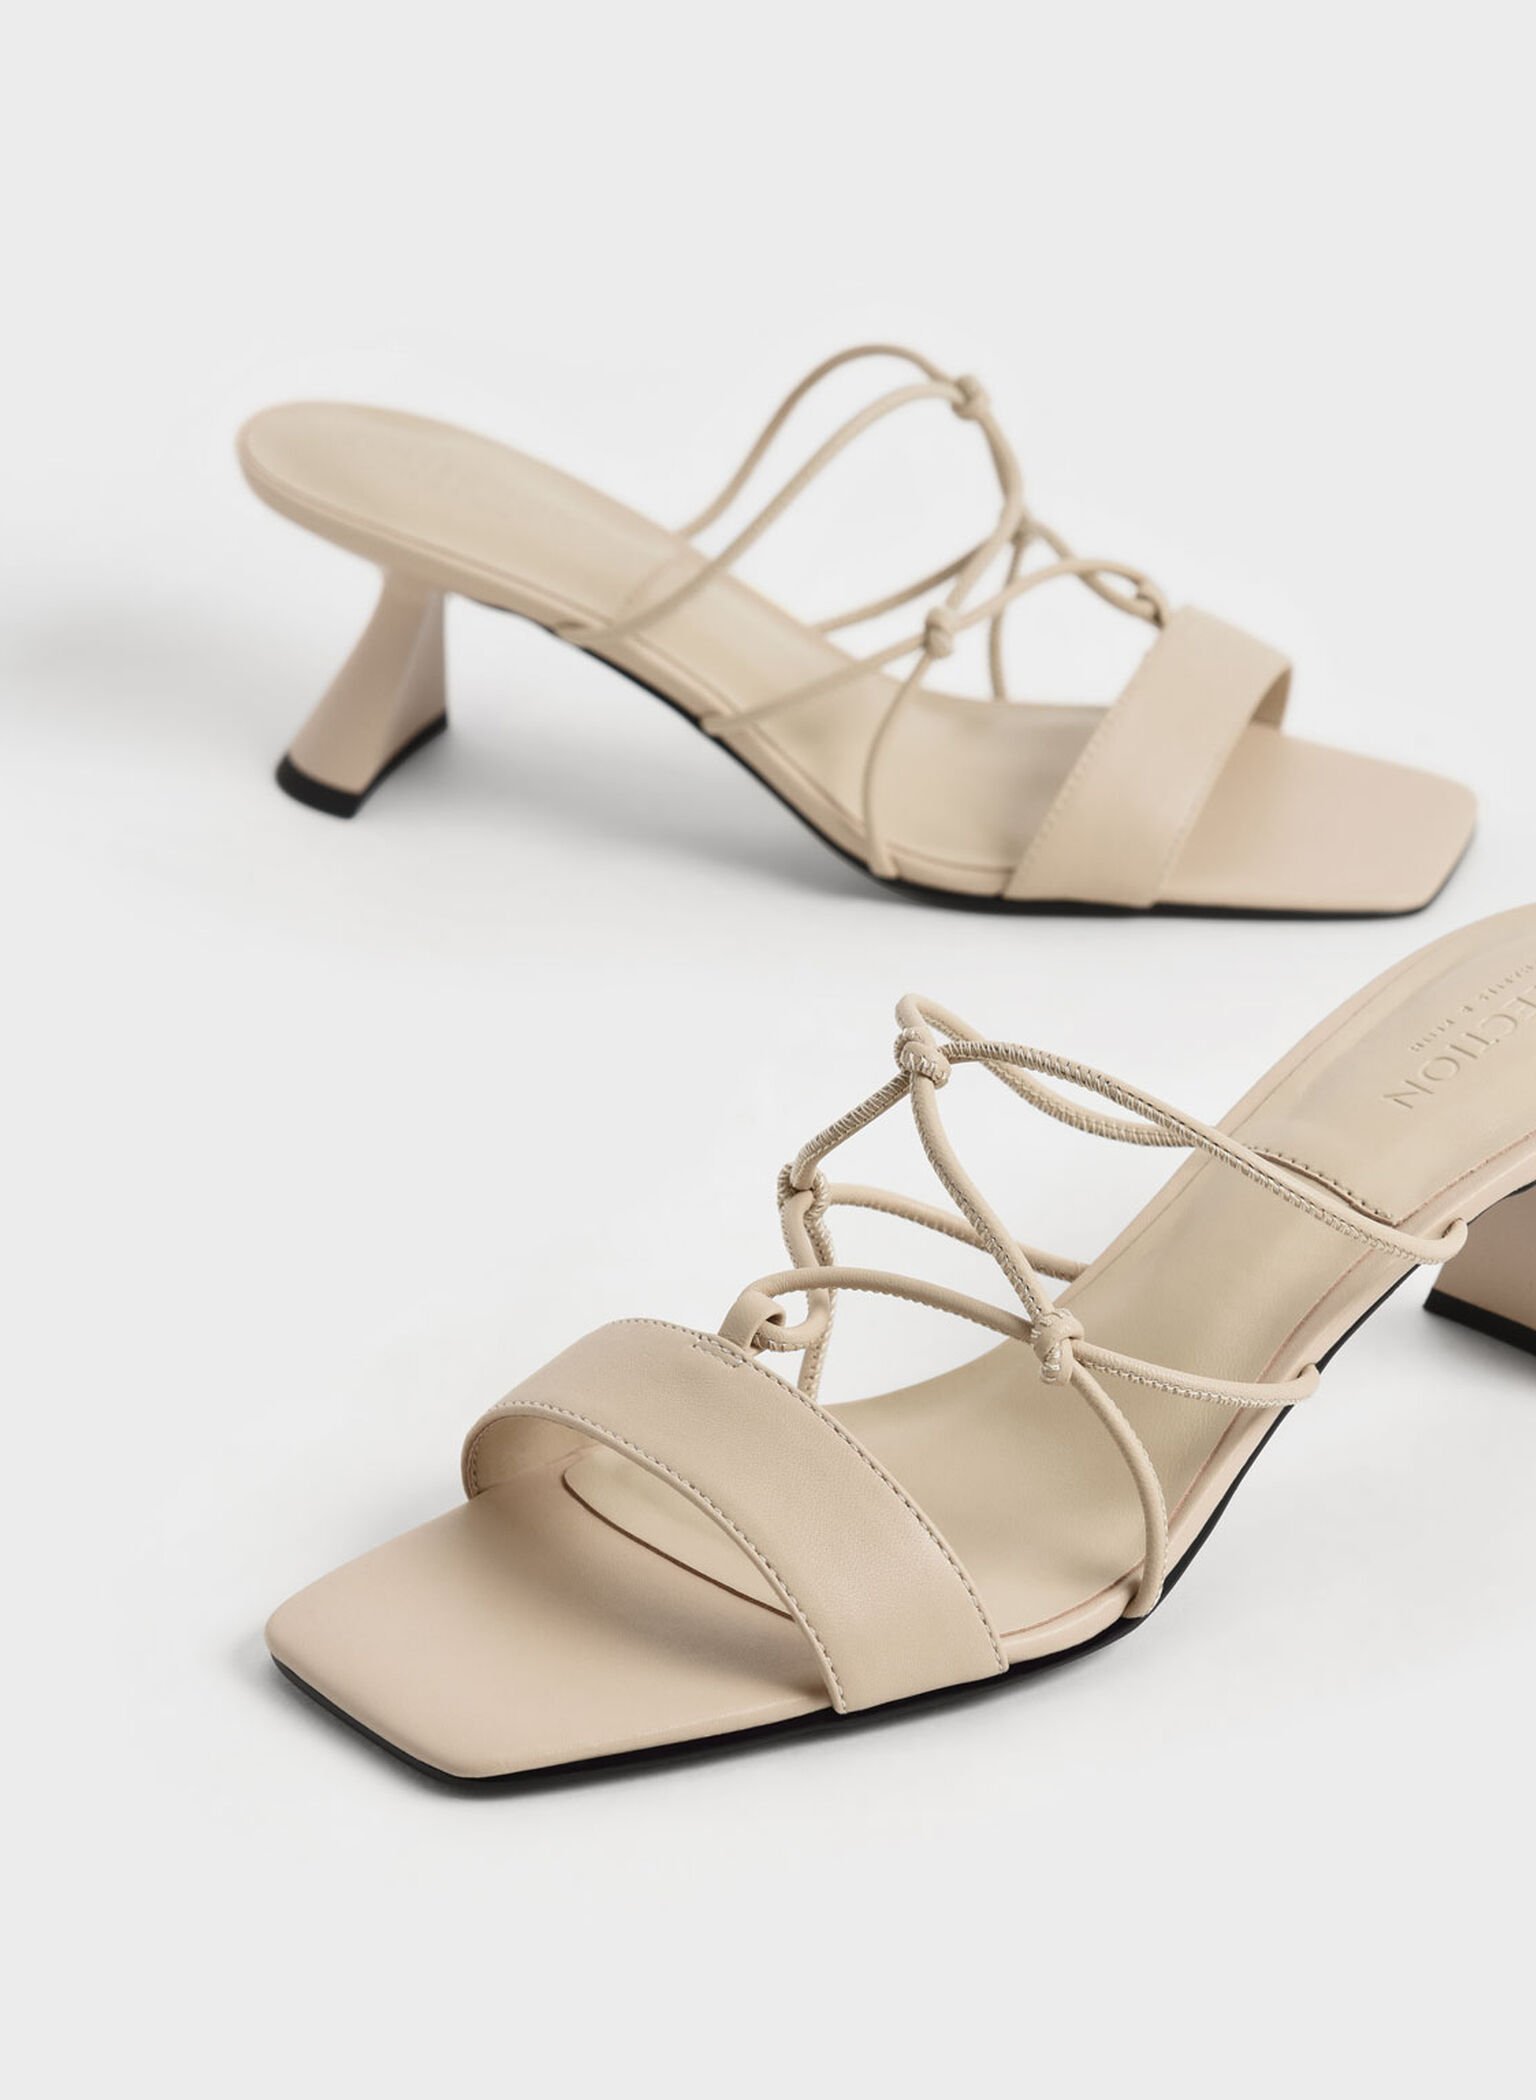 Beige Strappy Leather Sculptural Heel Sandals - CHARLES & KEITH MY